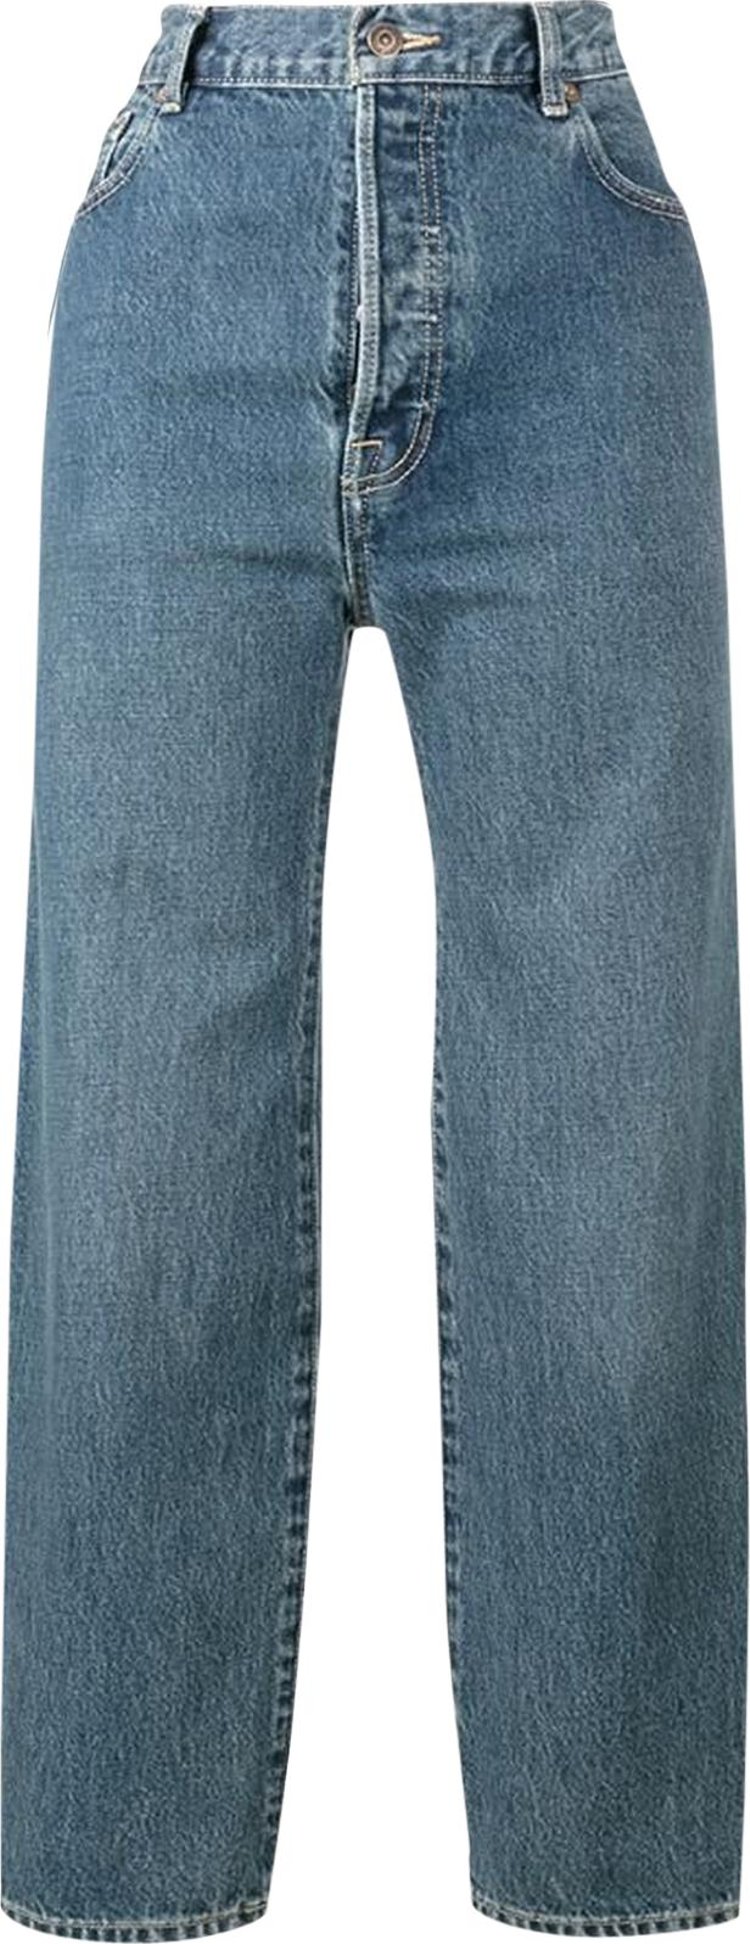 Levi's Vetements x Levi's High Waisted Jeans 'Mid Blue'